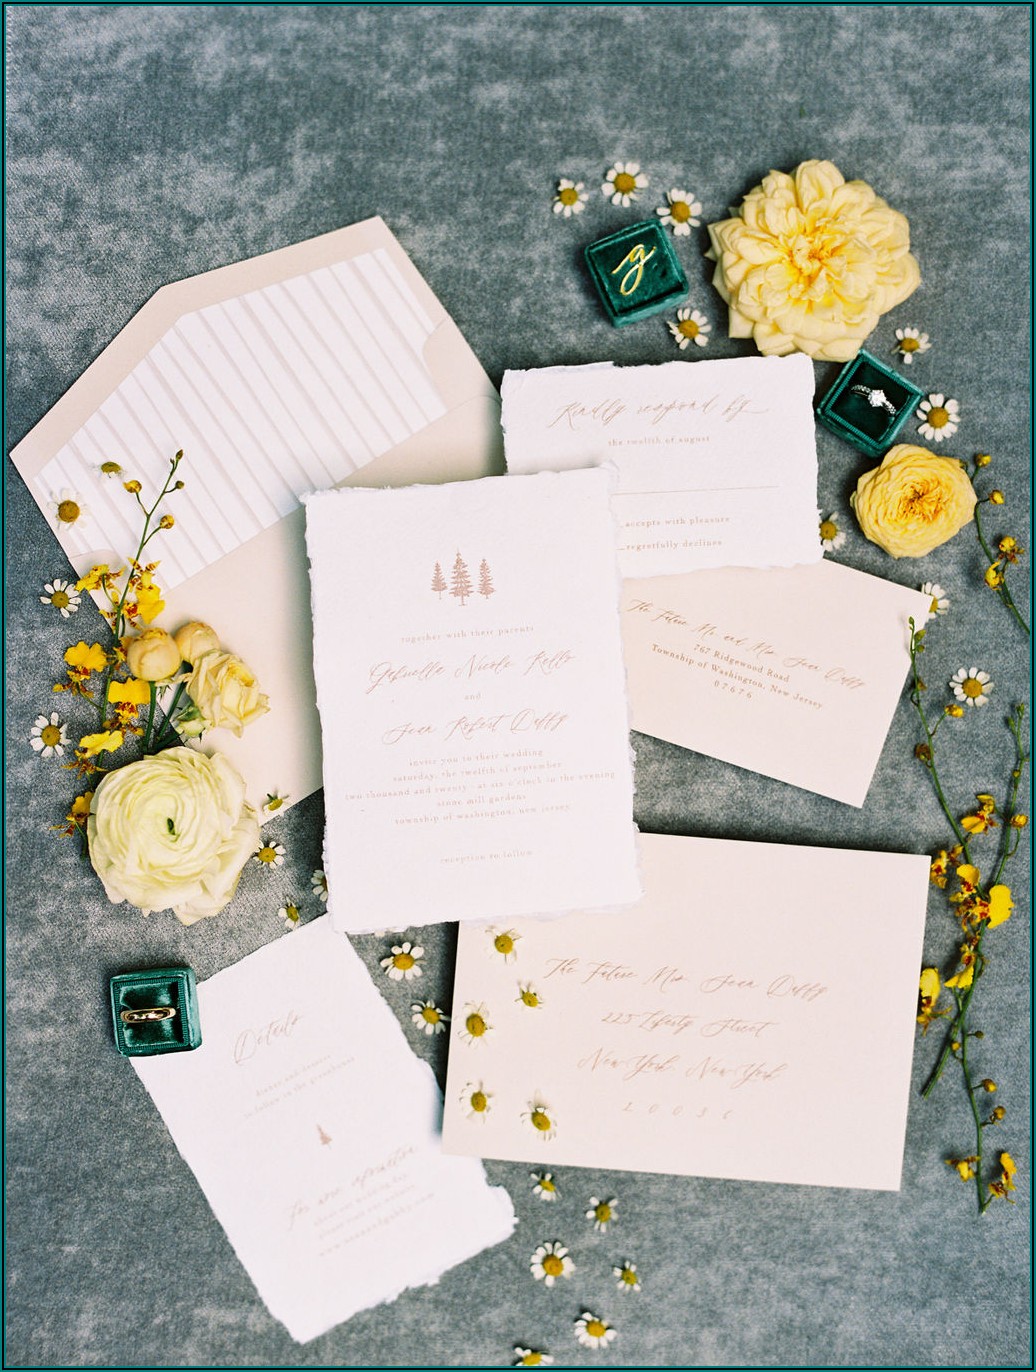 How To Properly Address Wedding Invitations Without Inner Envelope